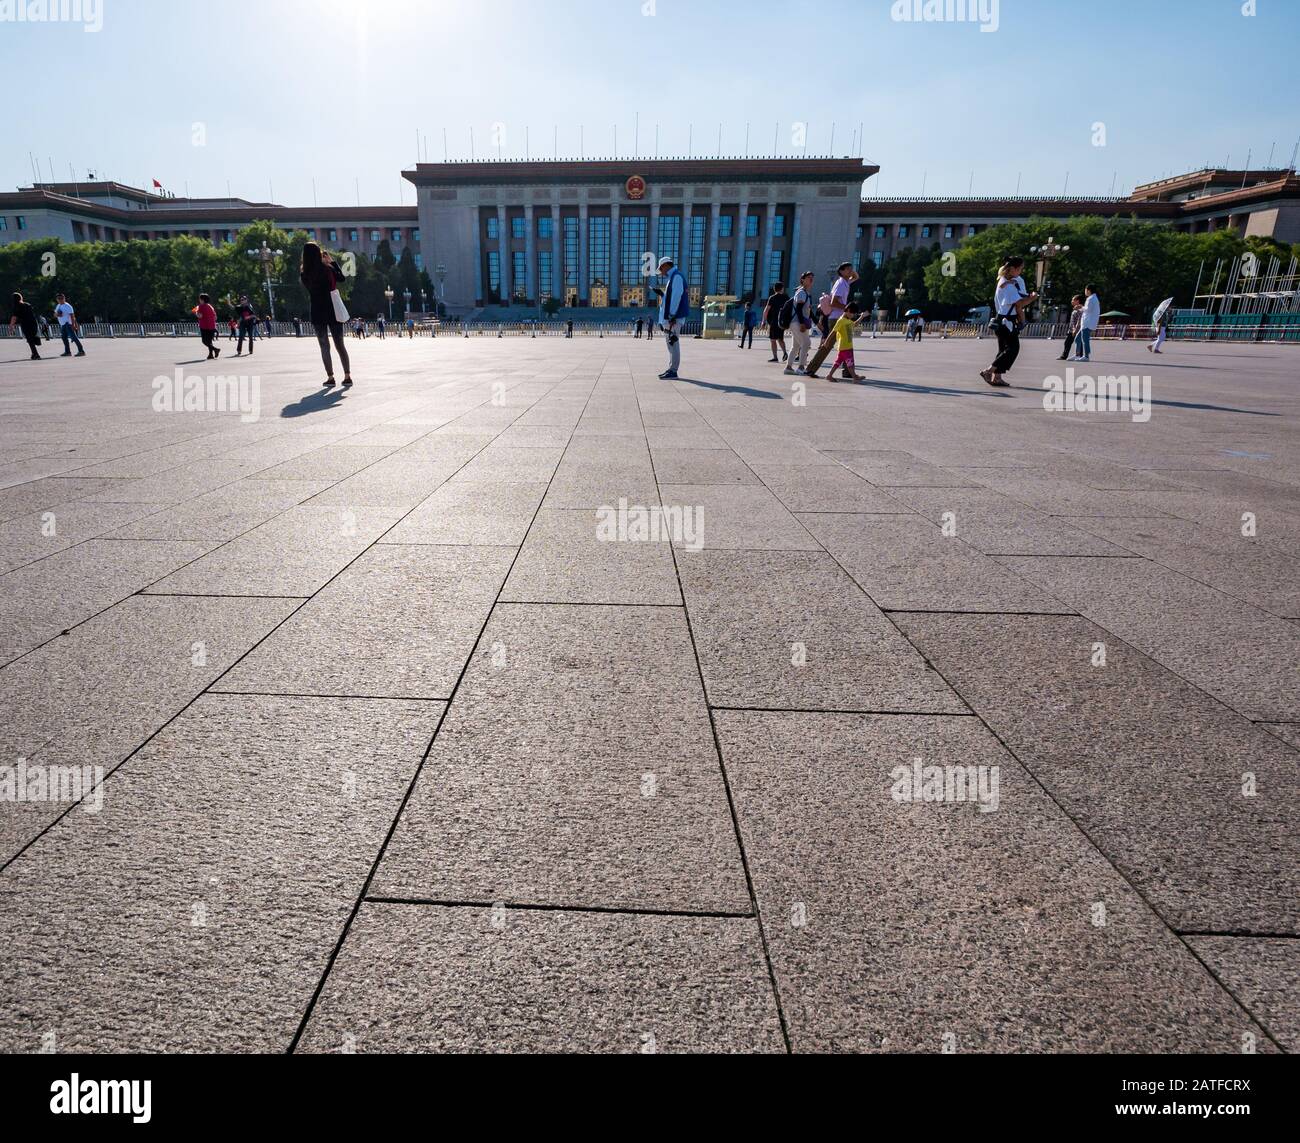 Mausoleum of Mao Zedong (Chairman Mao) with people in Tiananmen Square, Beijing, People's Republic of China Stock Photo